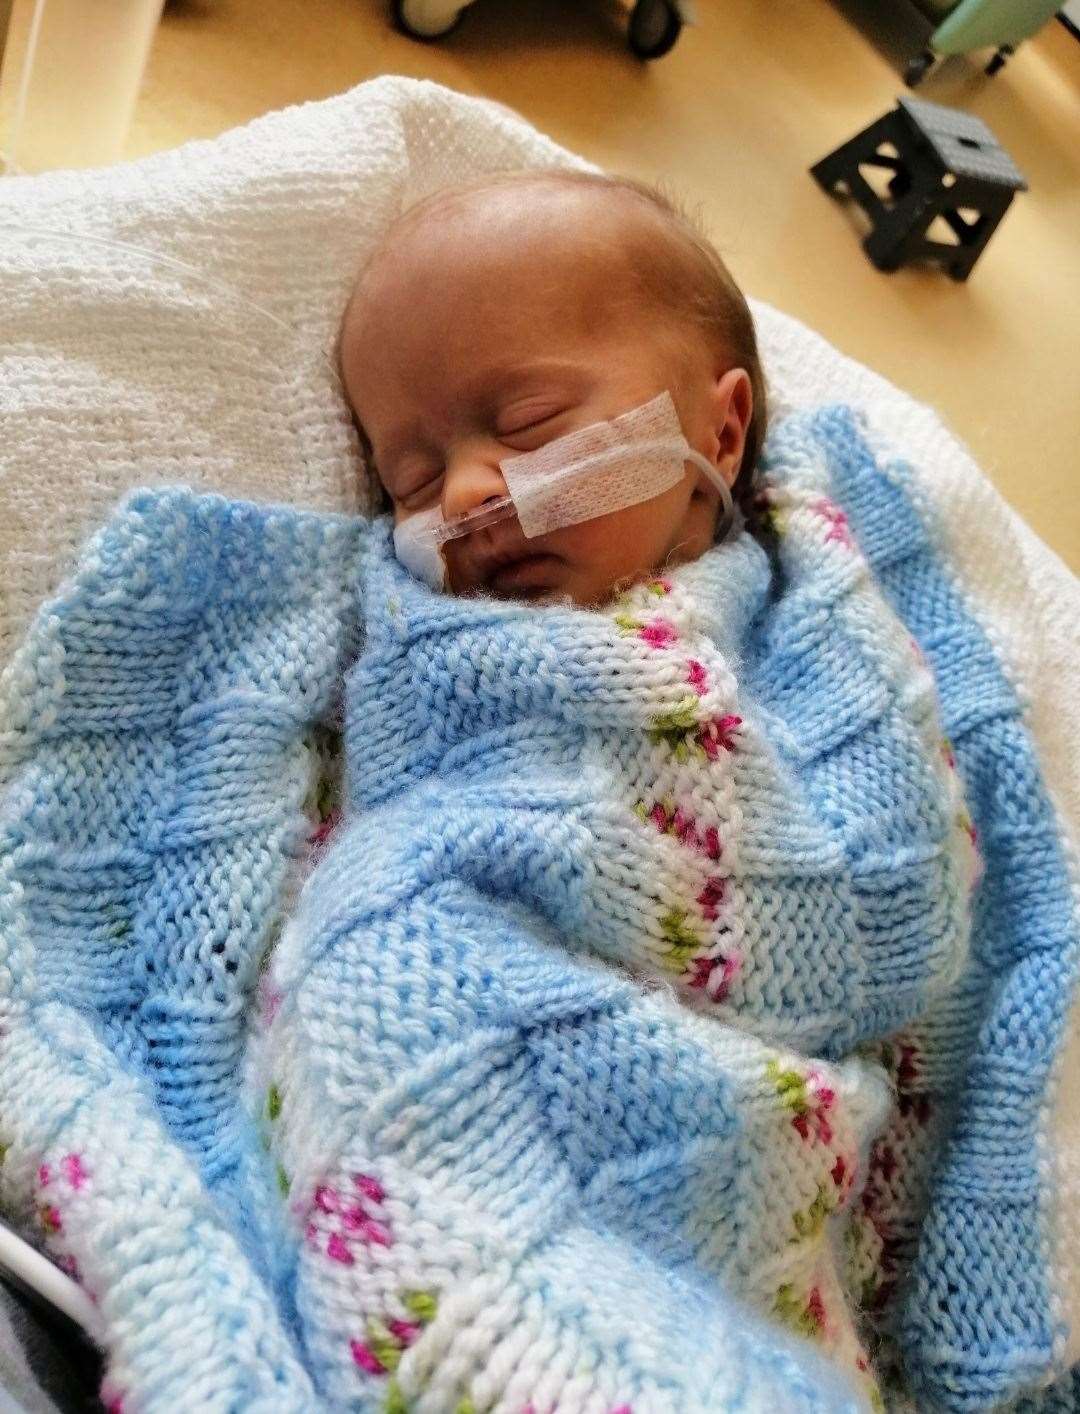 Rosie weighed just 3lbs 8oz when she was born prematurely